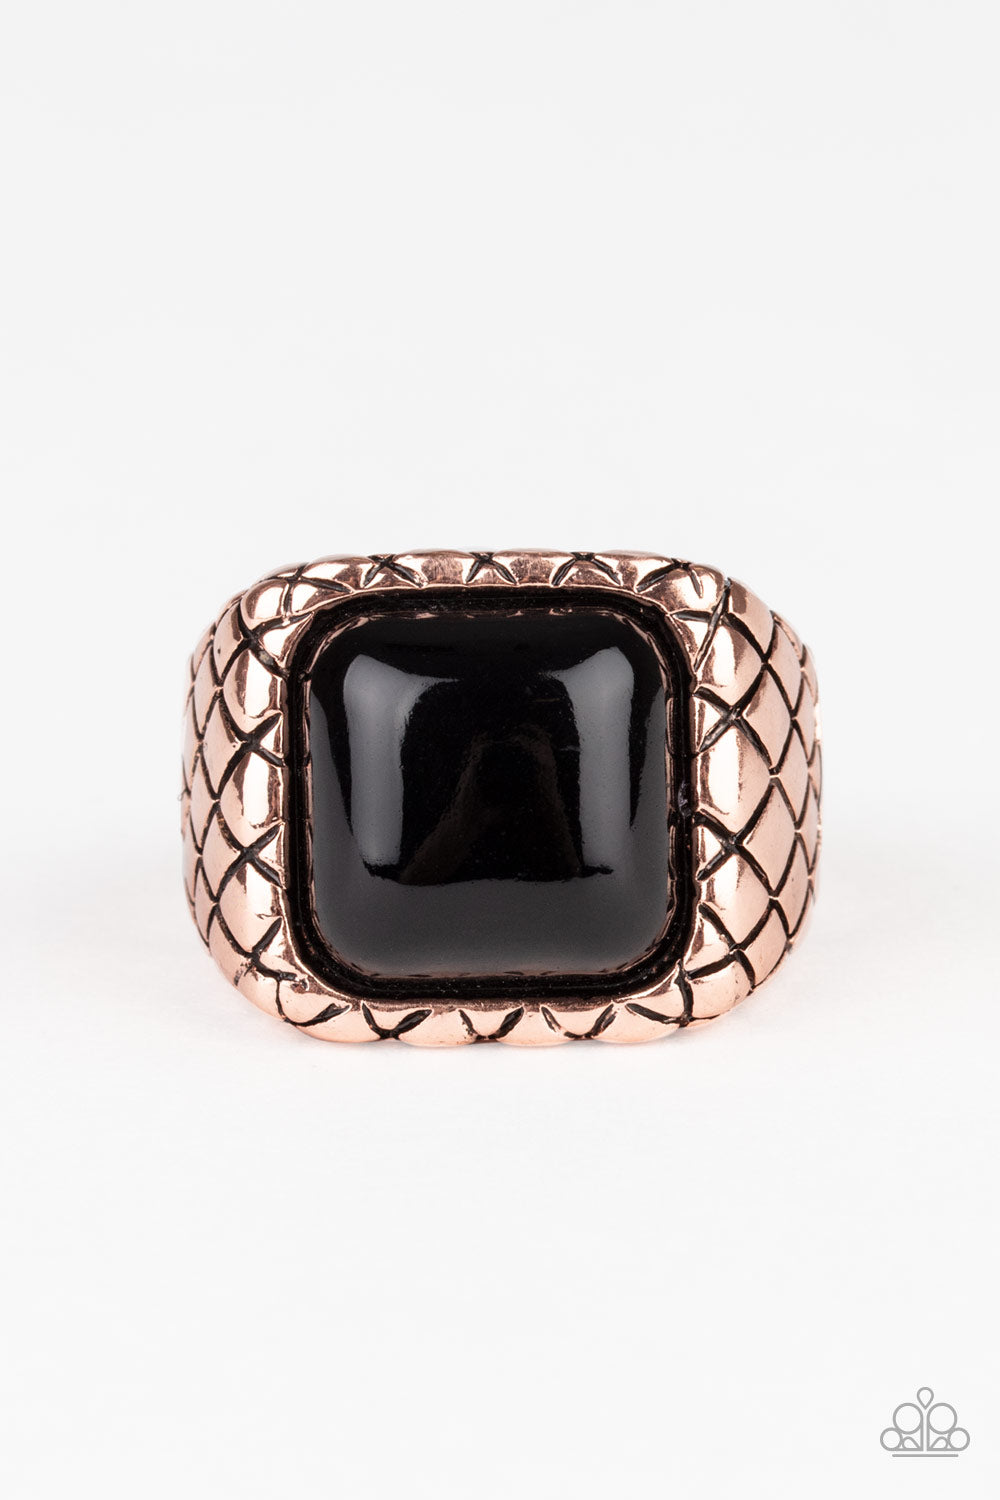 Dont Cross Me Copper Urban Ring - Paparazzi Accessories  An oversized black square bead is pressed into the center of a thick copper band stamped in crisscrossing texture for an edgy look. Features a stretchy band for a flexible fit.  All Paparazzi Accessories are lead free and nickel free!  Sold as one individual ring.